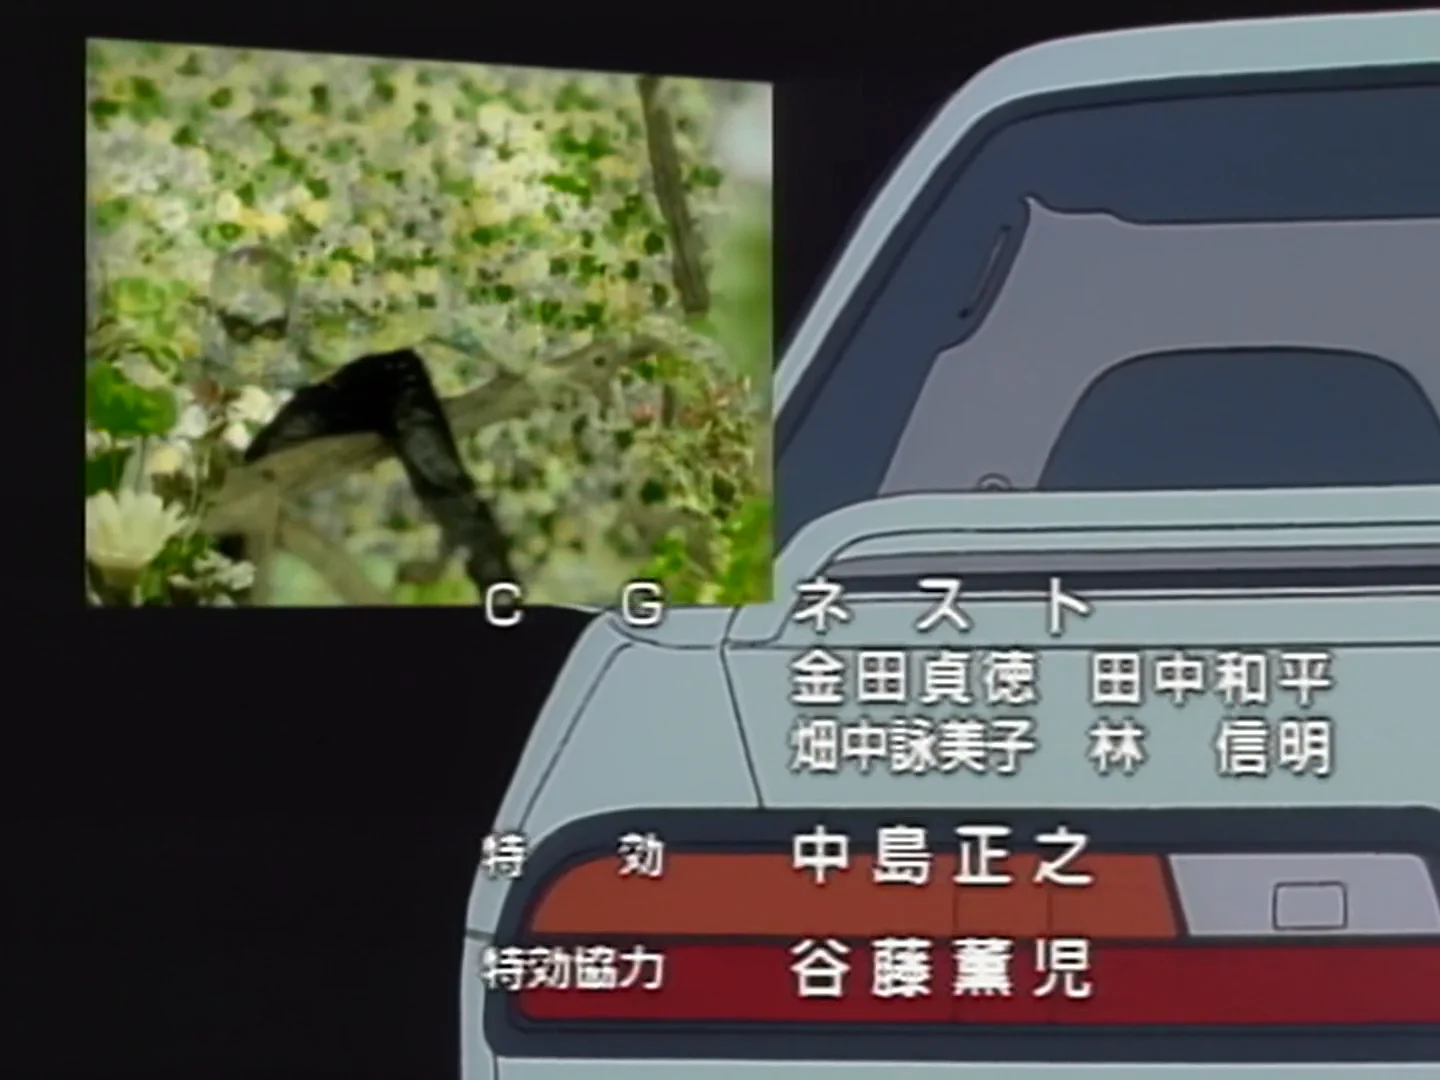 Initial D First Stage Ending on Vimeo